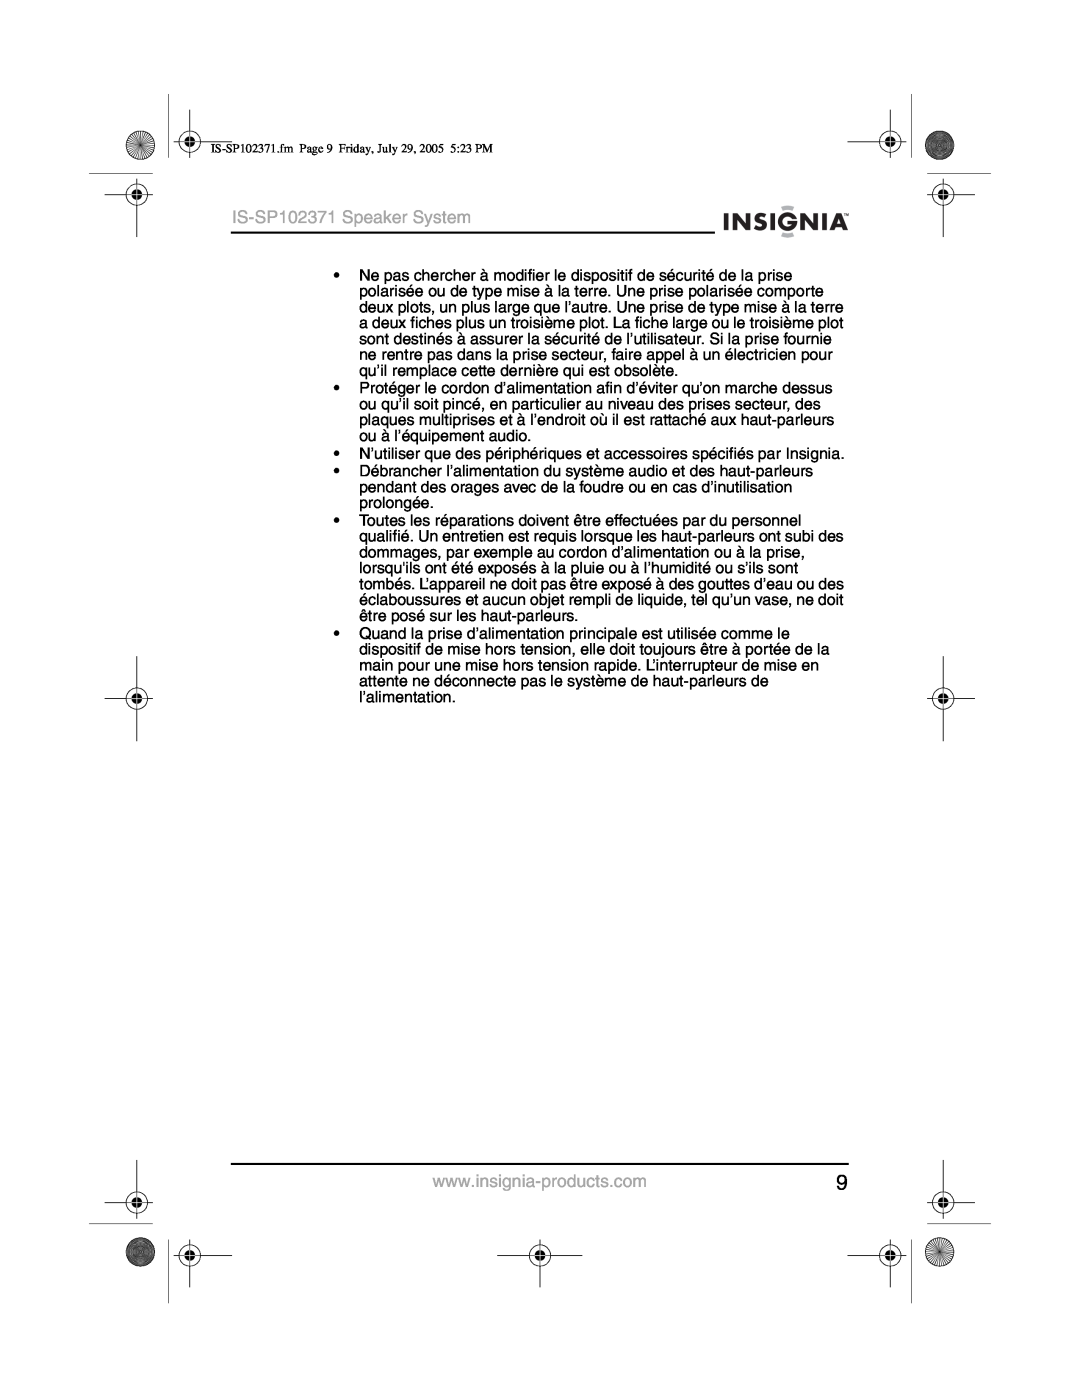 Insignia manual IS-SP102371Speaker System 